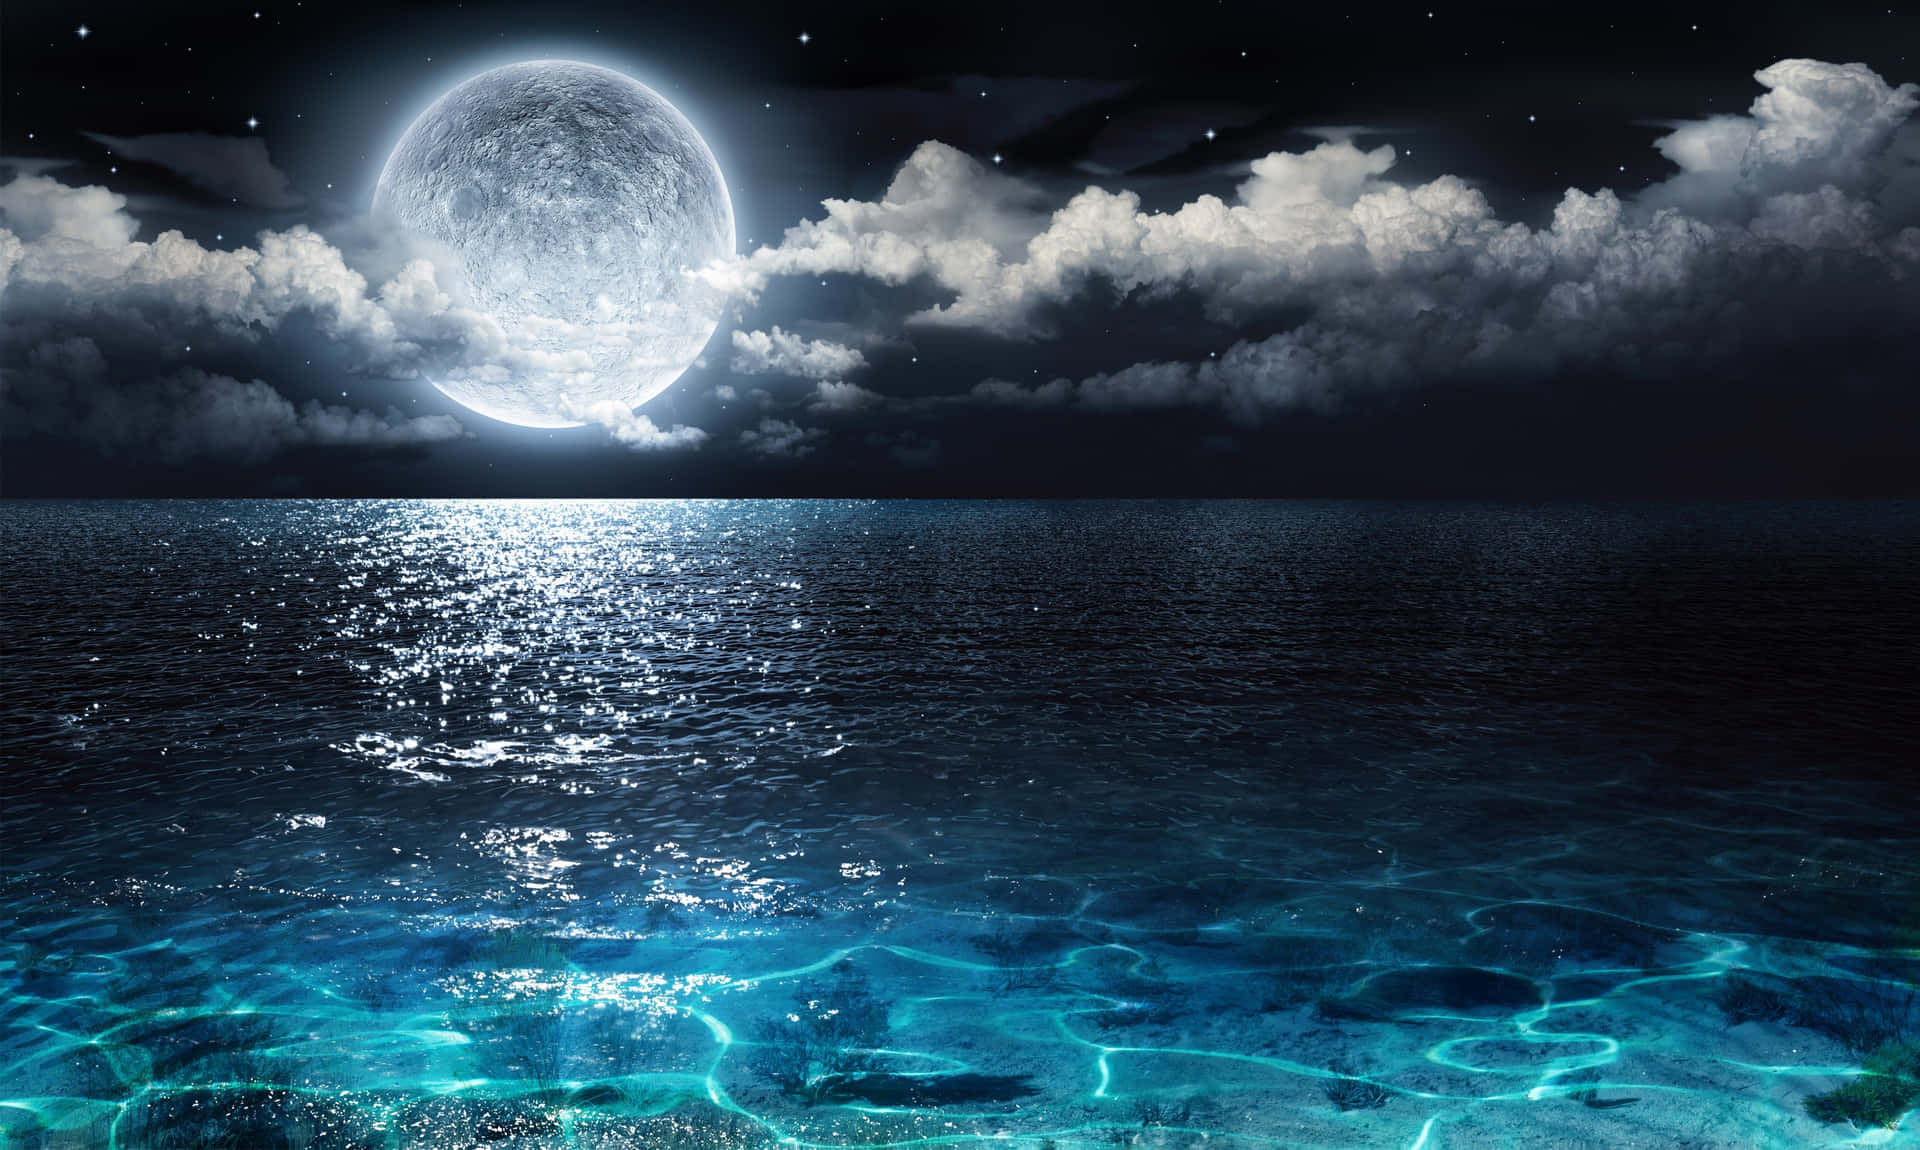 Take in the tranquil beauty of the Moon on a clear night" Wallpaper